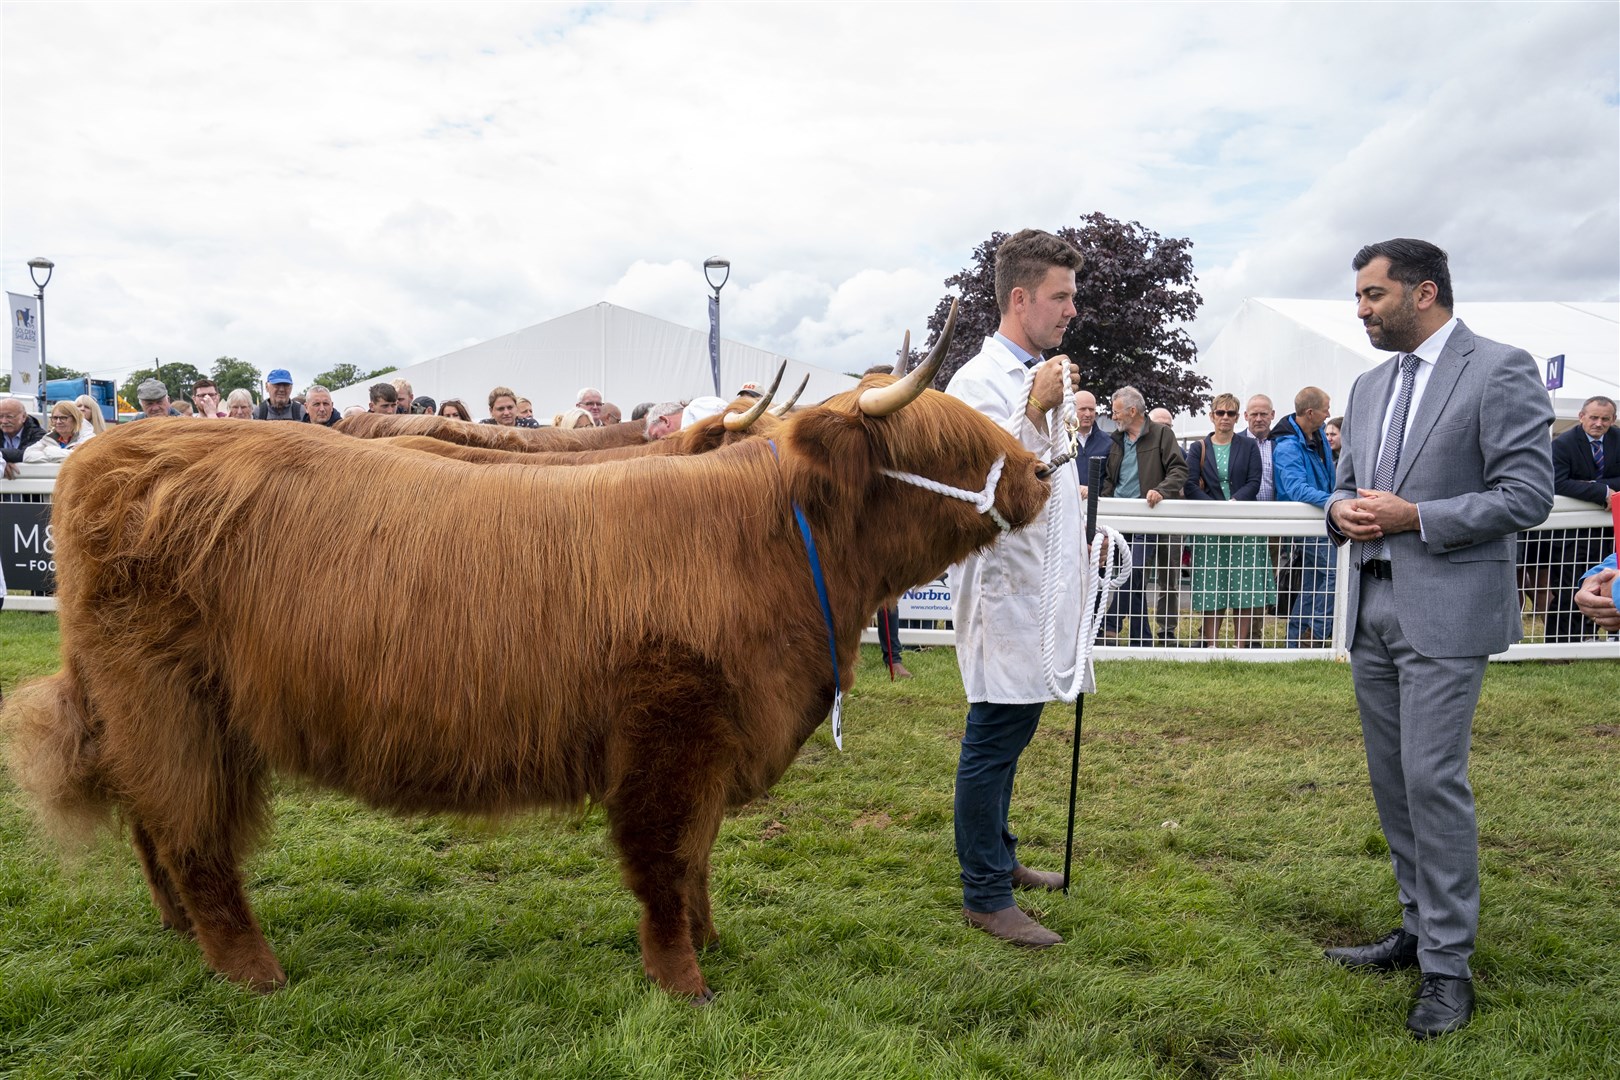 Humza Yousaf meets a competitor in the cattle ring at the Royal Highland Show (Jane Barlow/PA)